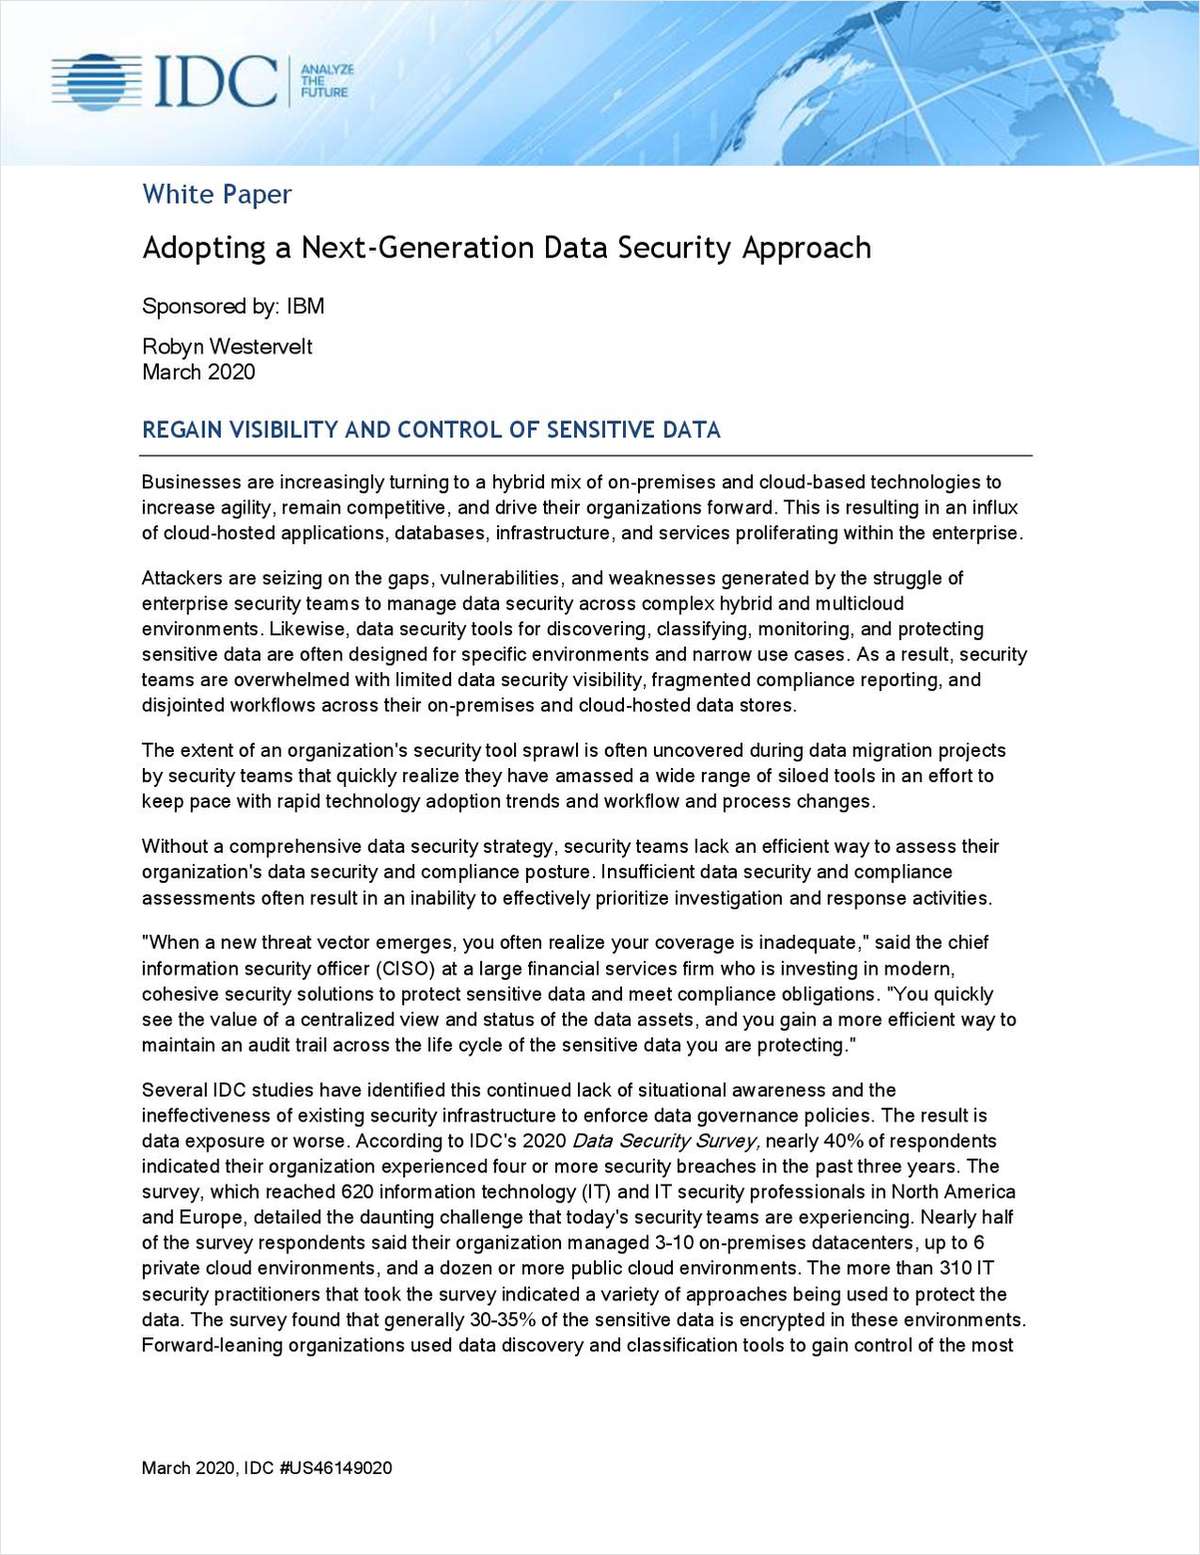 Adopting a Next-Generation Data Security Approach